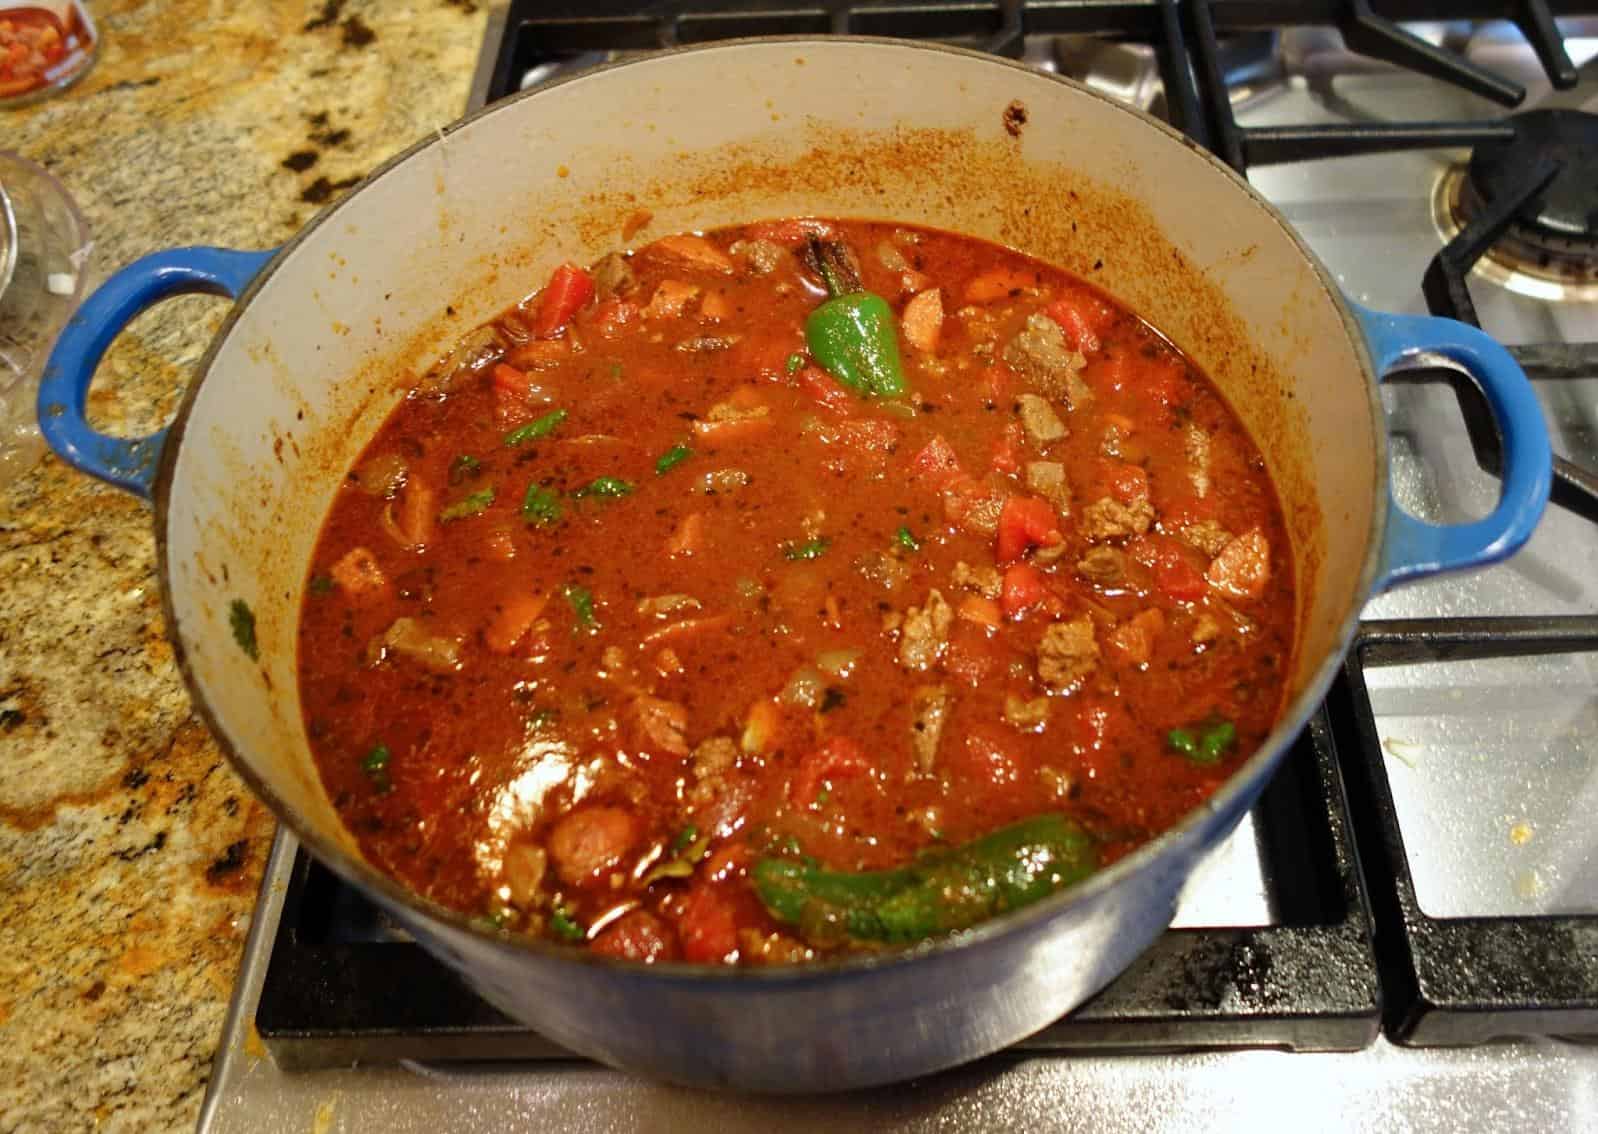  The combination of spices in this chili will make your taste buds dance.